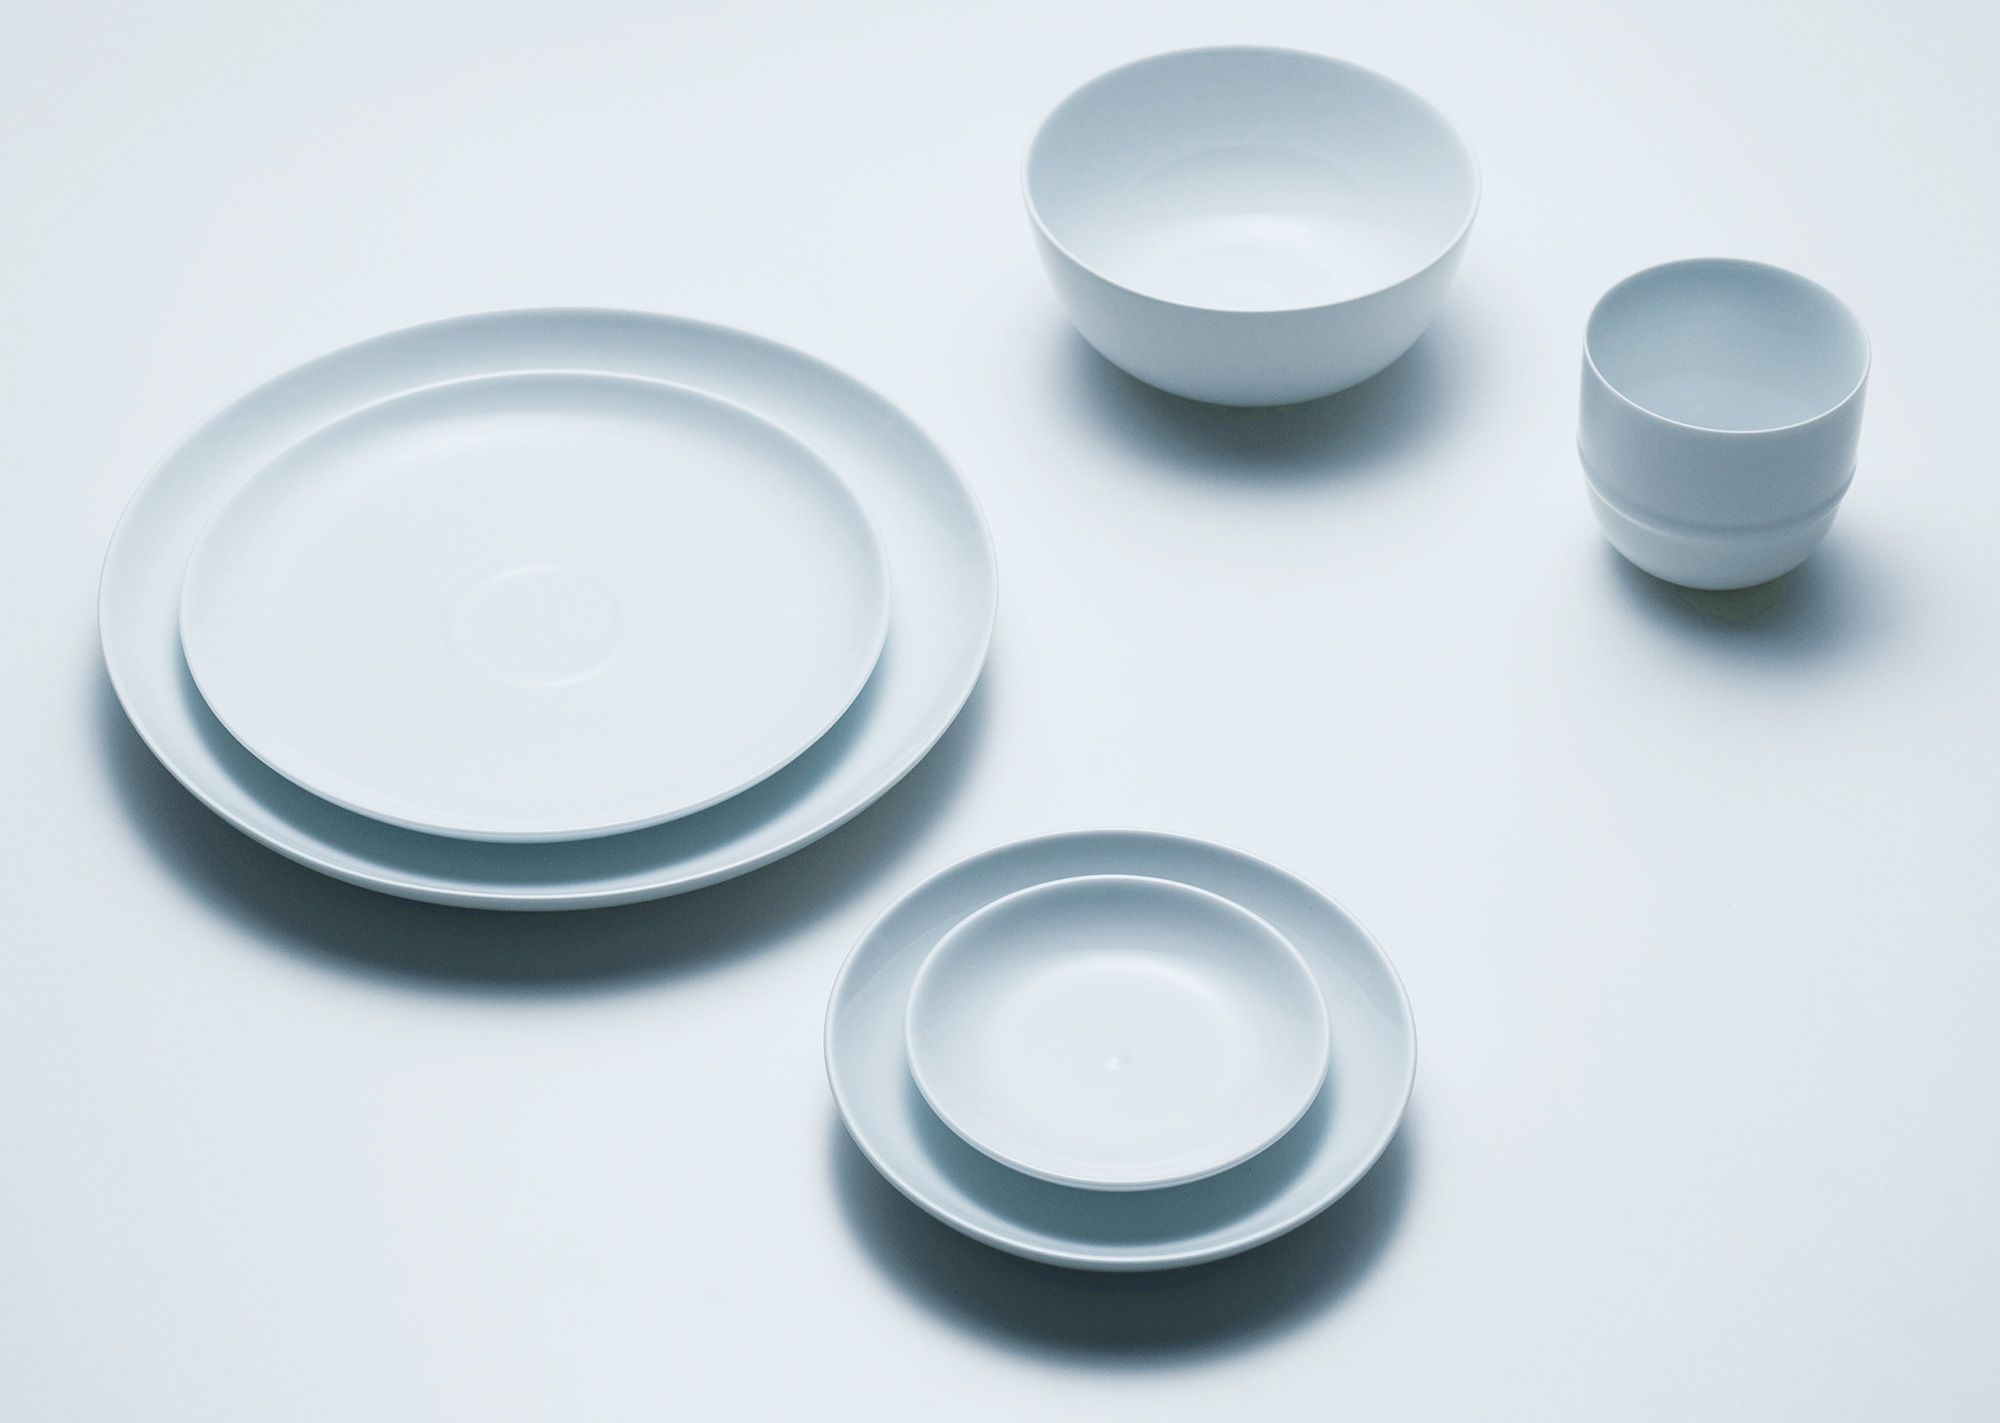 Plates (3 sizes starting from 145mm): \1,836, Cup: \1,404